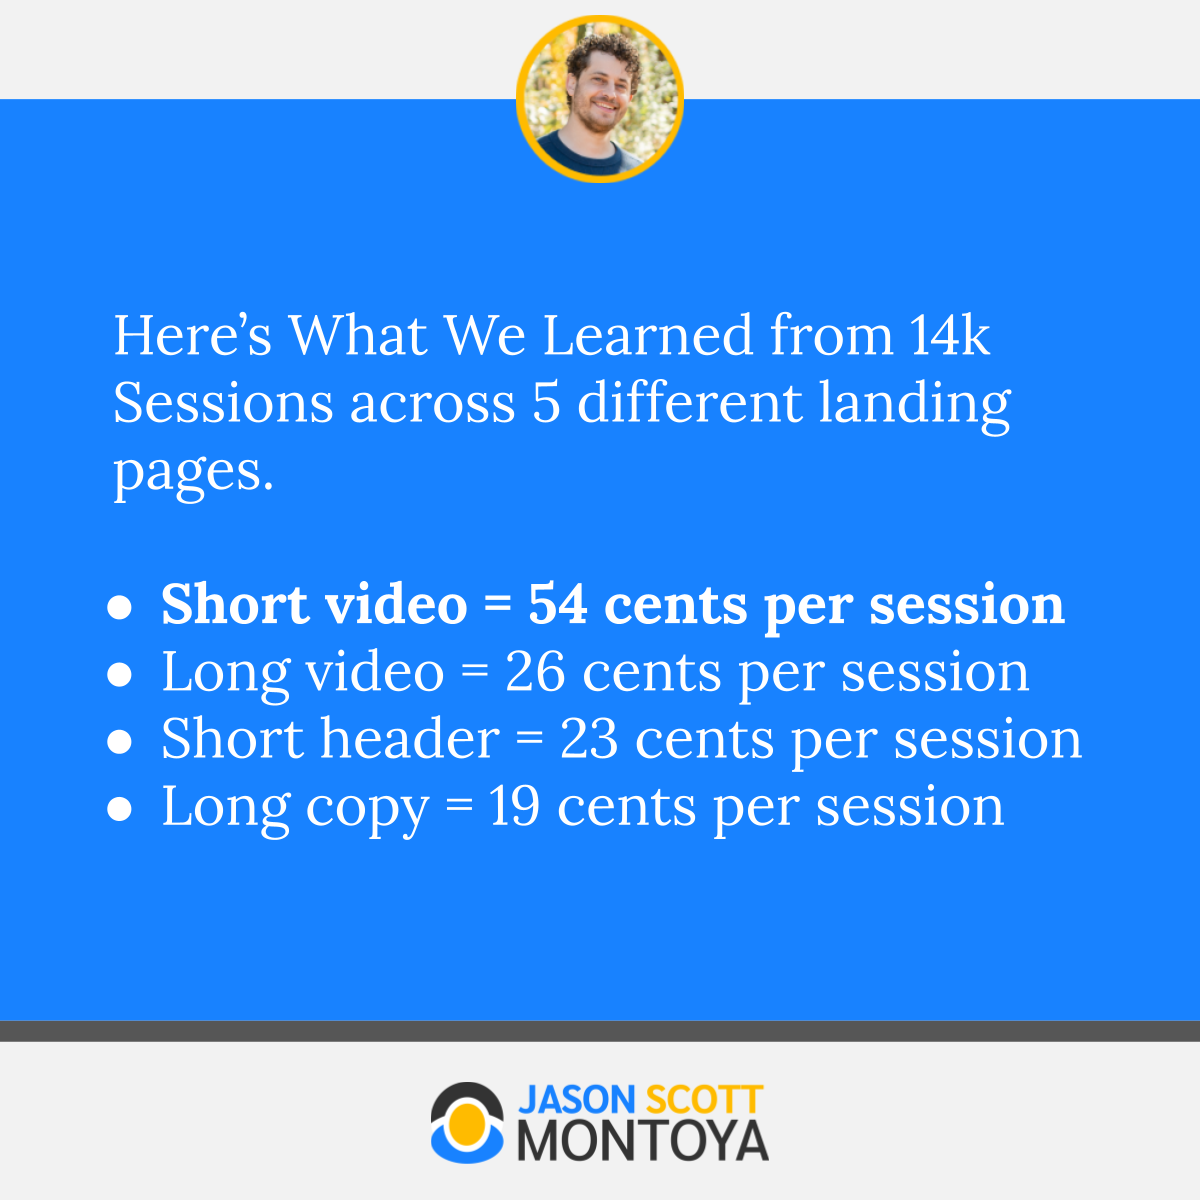 Here’s What We Learned from 14k Sessions across 5 different landing pages.  Short video = 54 cents per session  Long video = 26 cents per session  Short header = 23 cents per session  Long copy = 19 cents per session